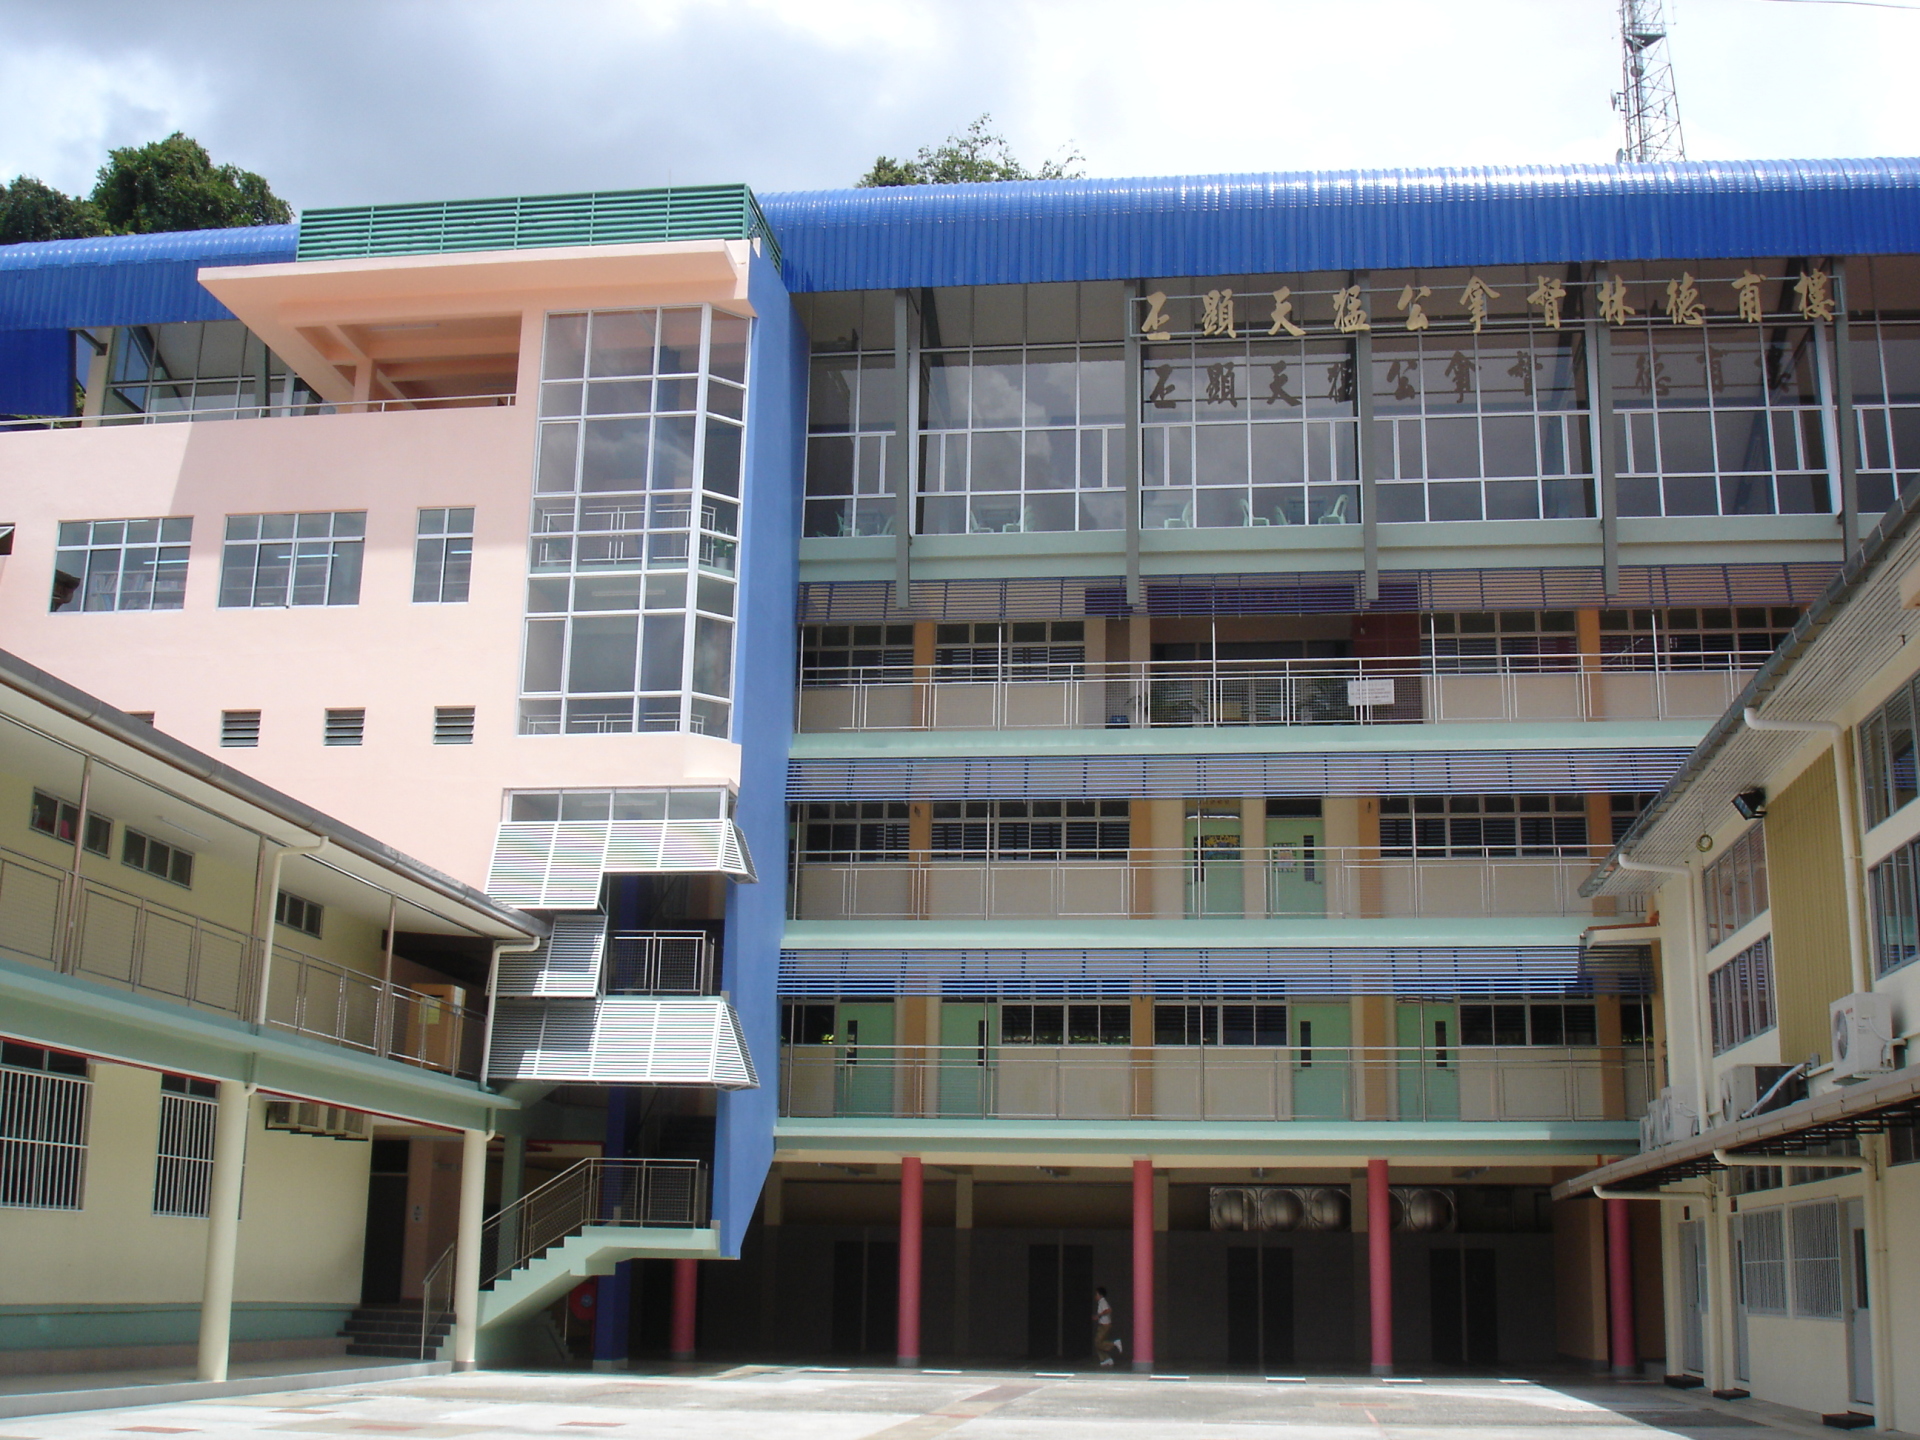 Chung Hwa Middle School